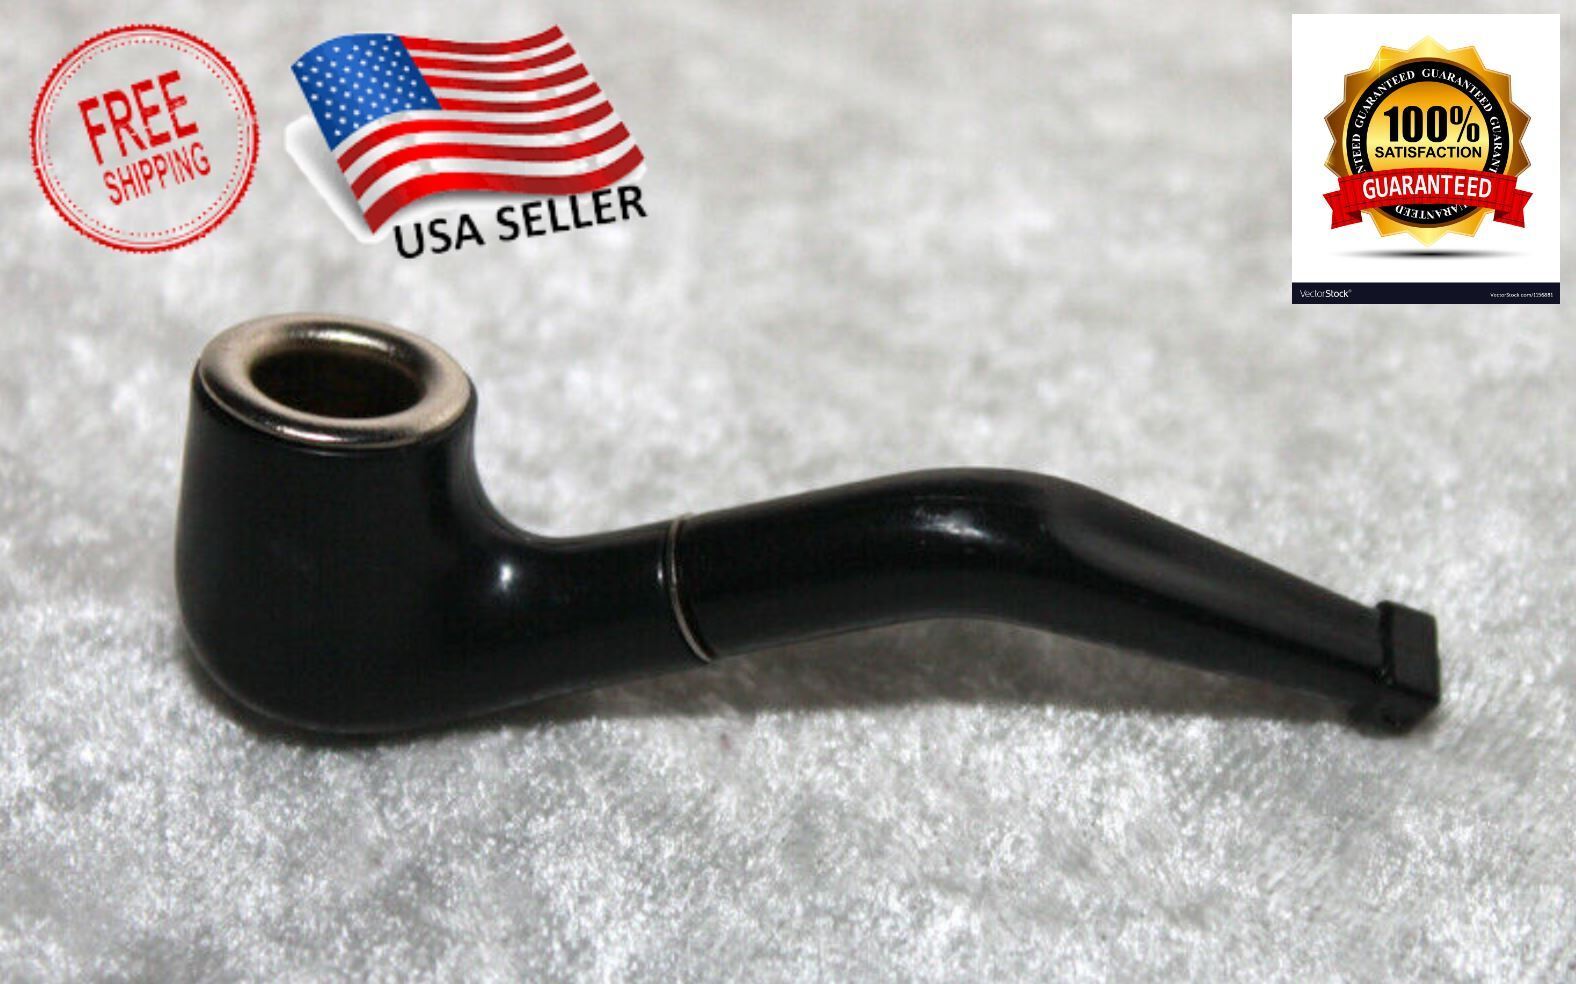 Doll Size Mini Tobacco Smoking Pipe Black 1/3 1/4 scale Dollfie One Hit 1 Hitter